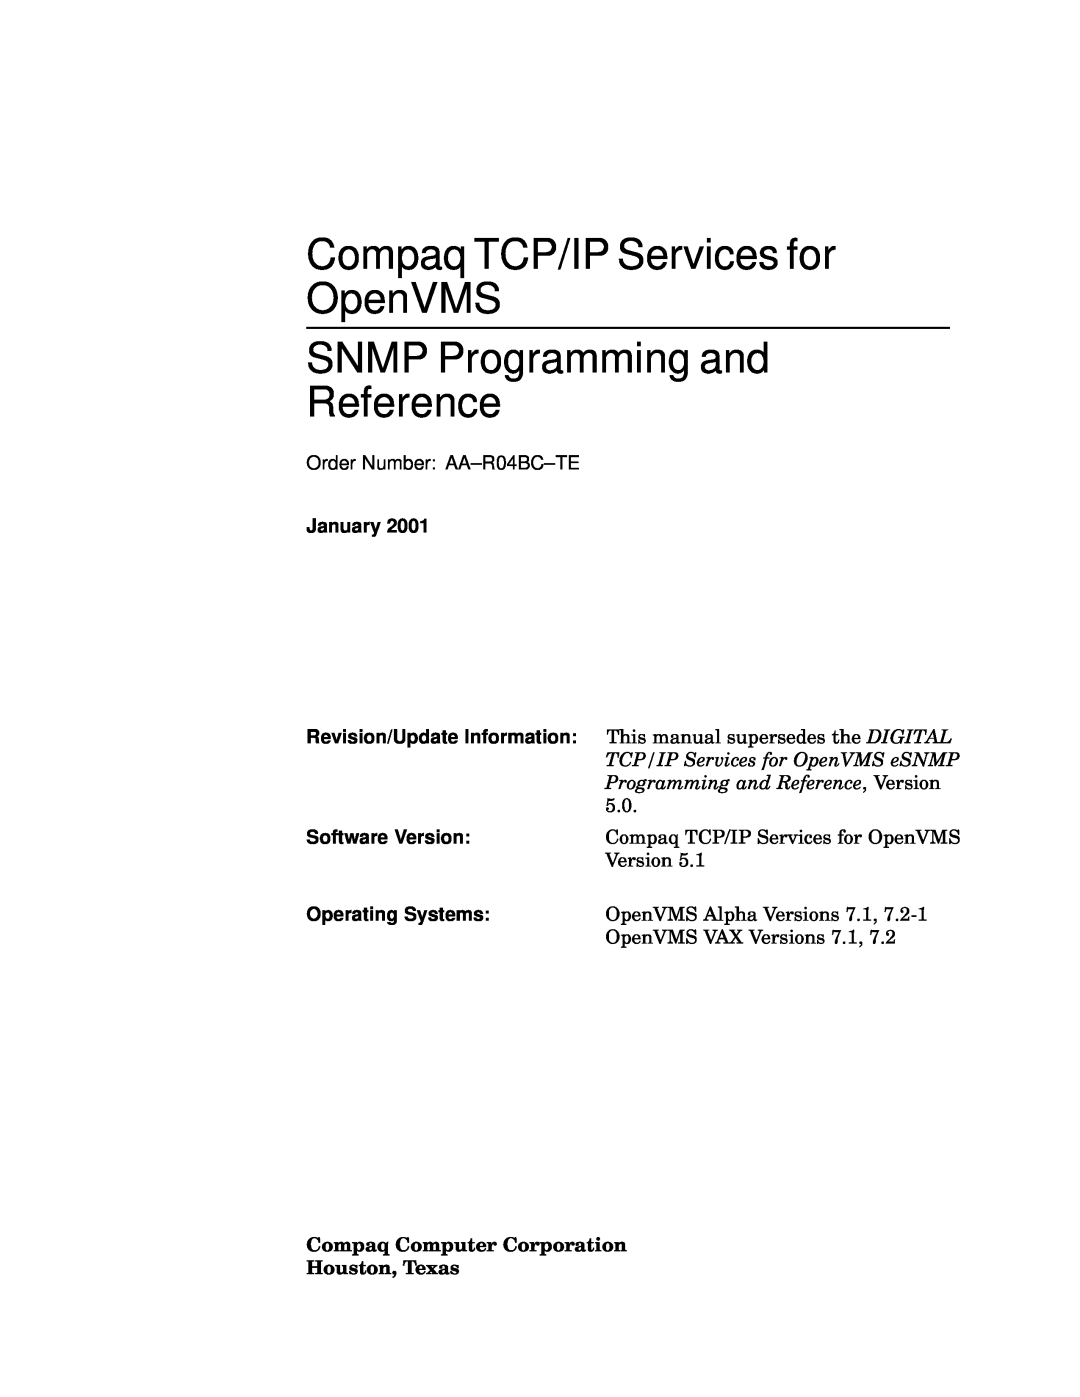 Compaq AAR04BCTE manual January, Compaq TCP/IP Services for OpenVMS SNMP Programming and Reference 